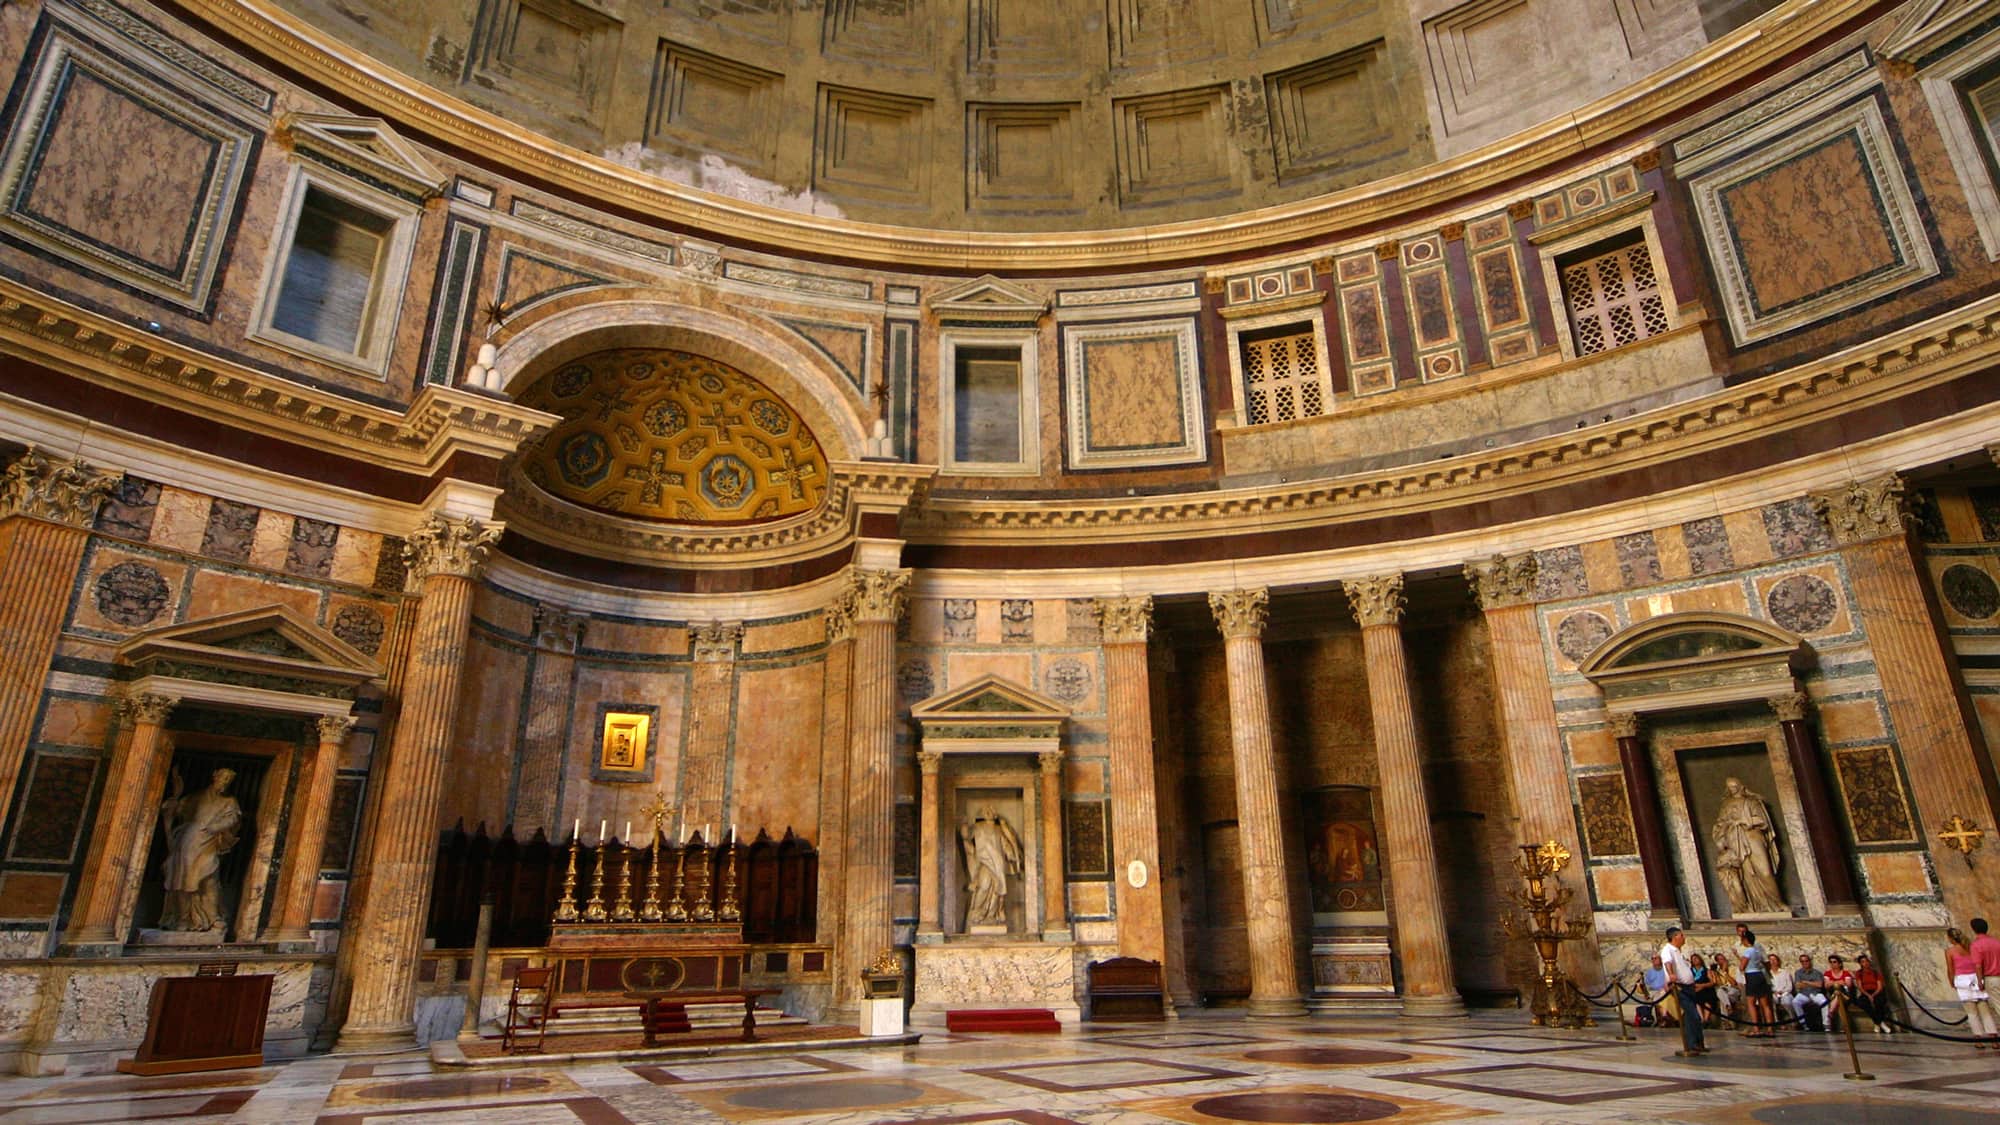 Inside the Pantheon in Rome